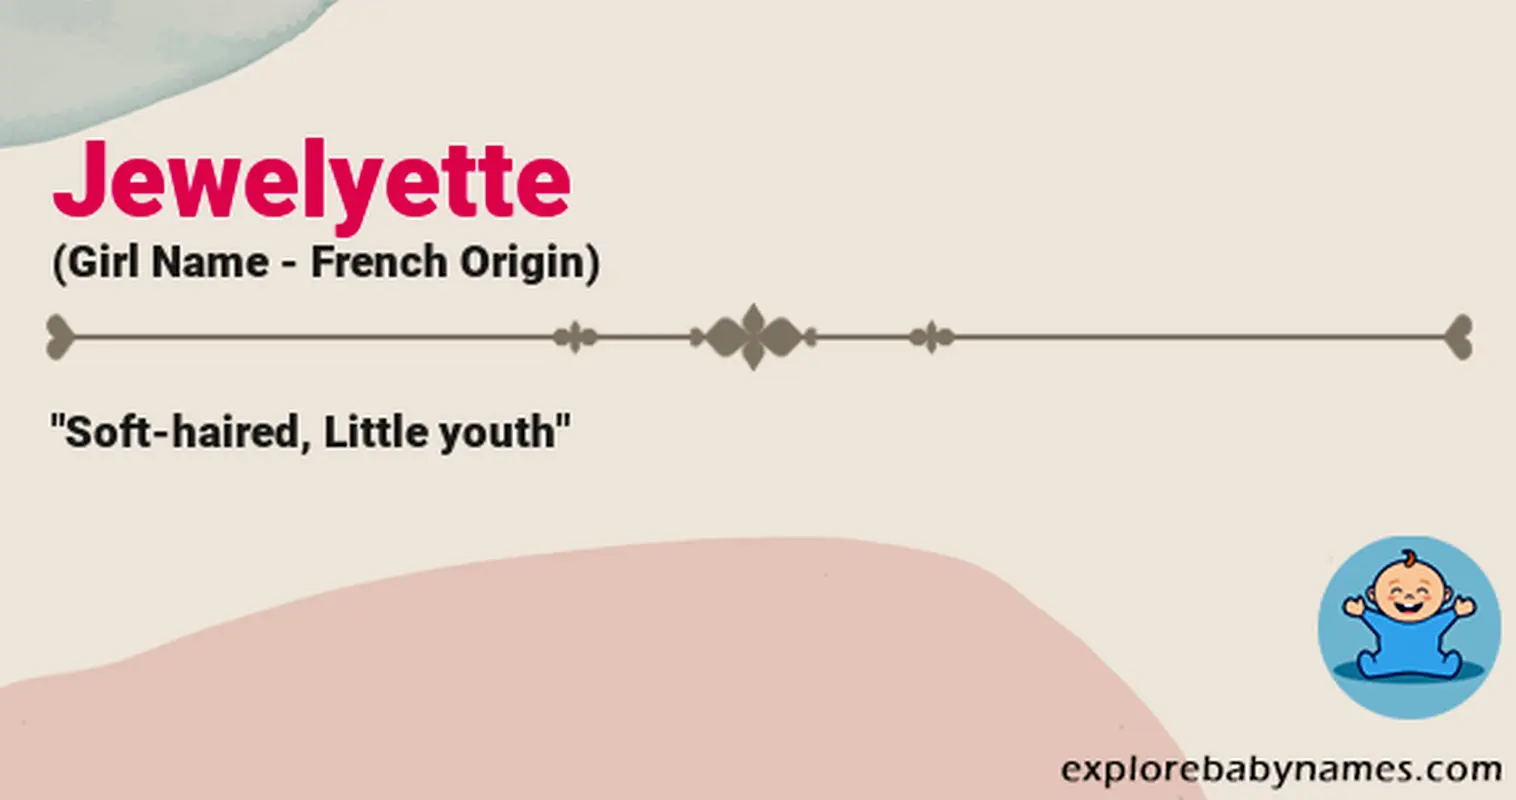 Meaning of Jewelyette